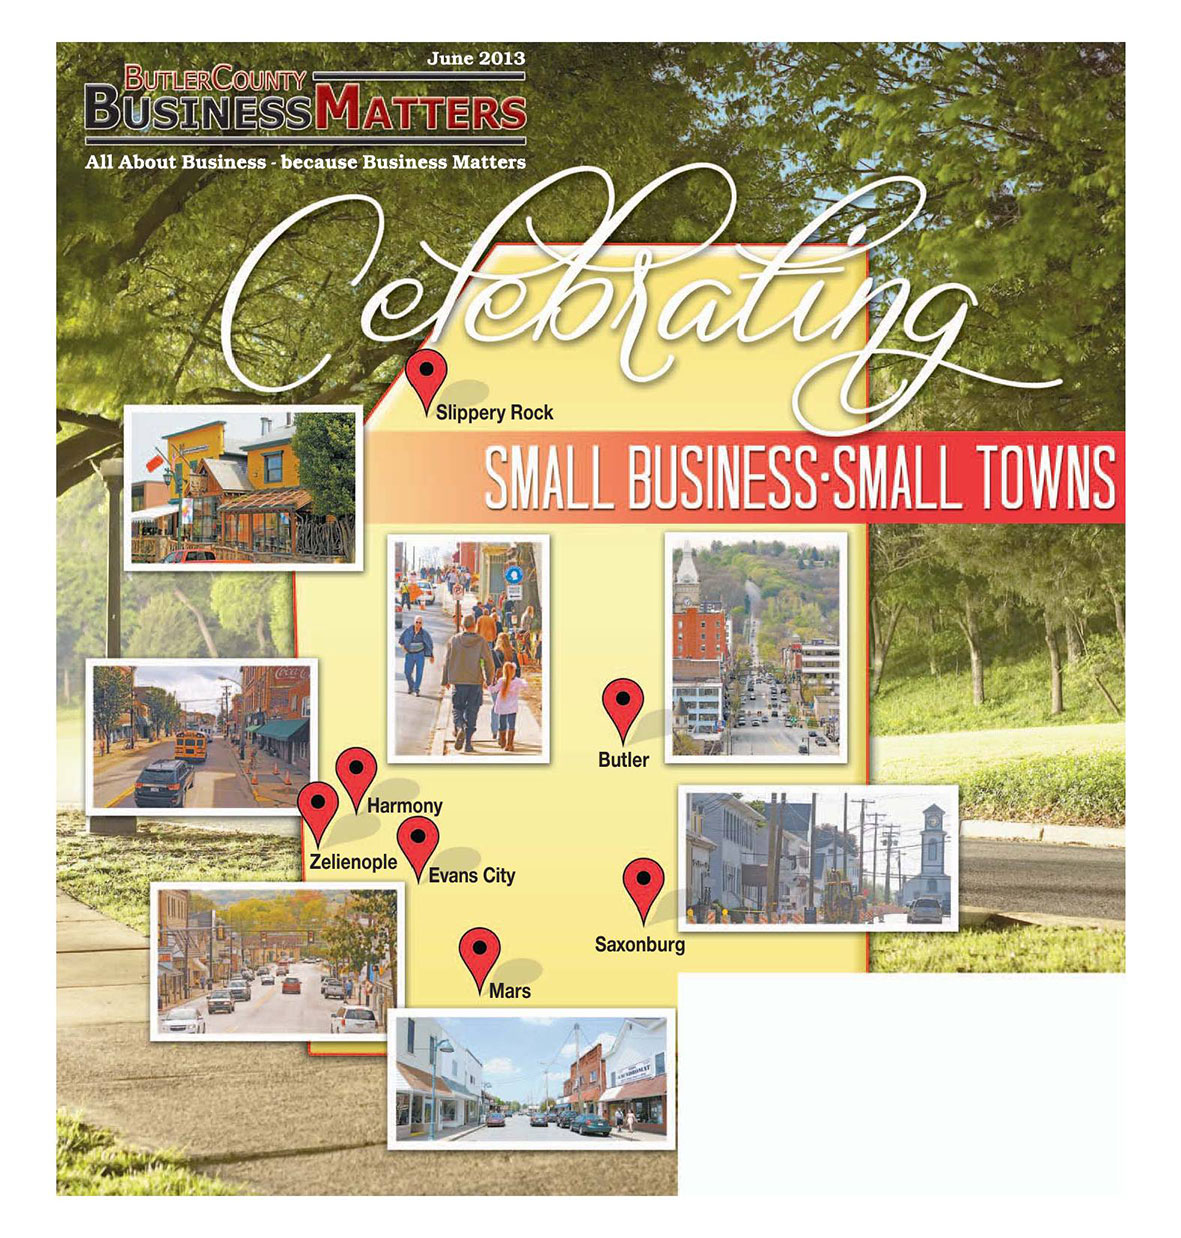 June 2013 - Celebrating - Small Business - Small Towns